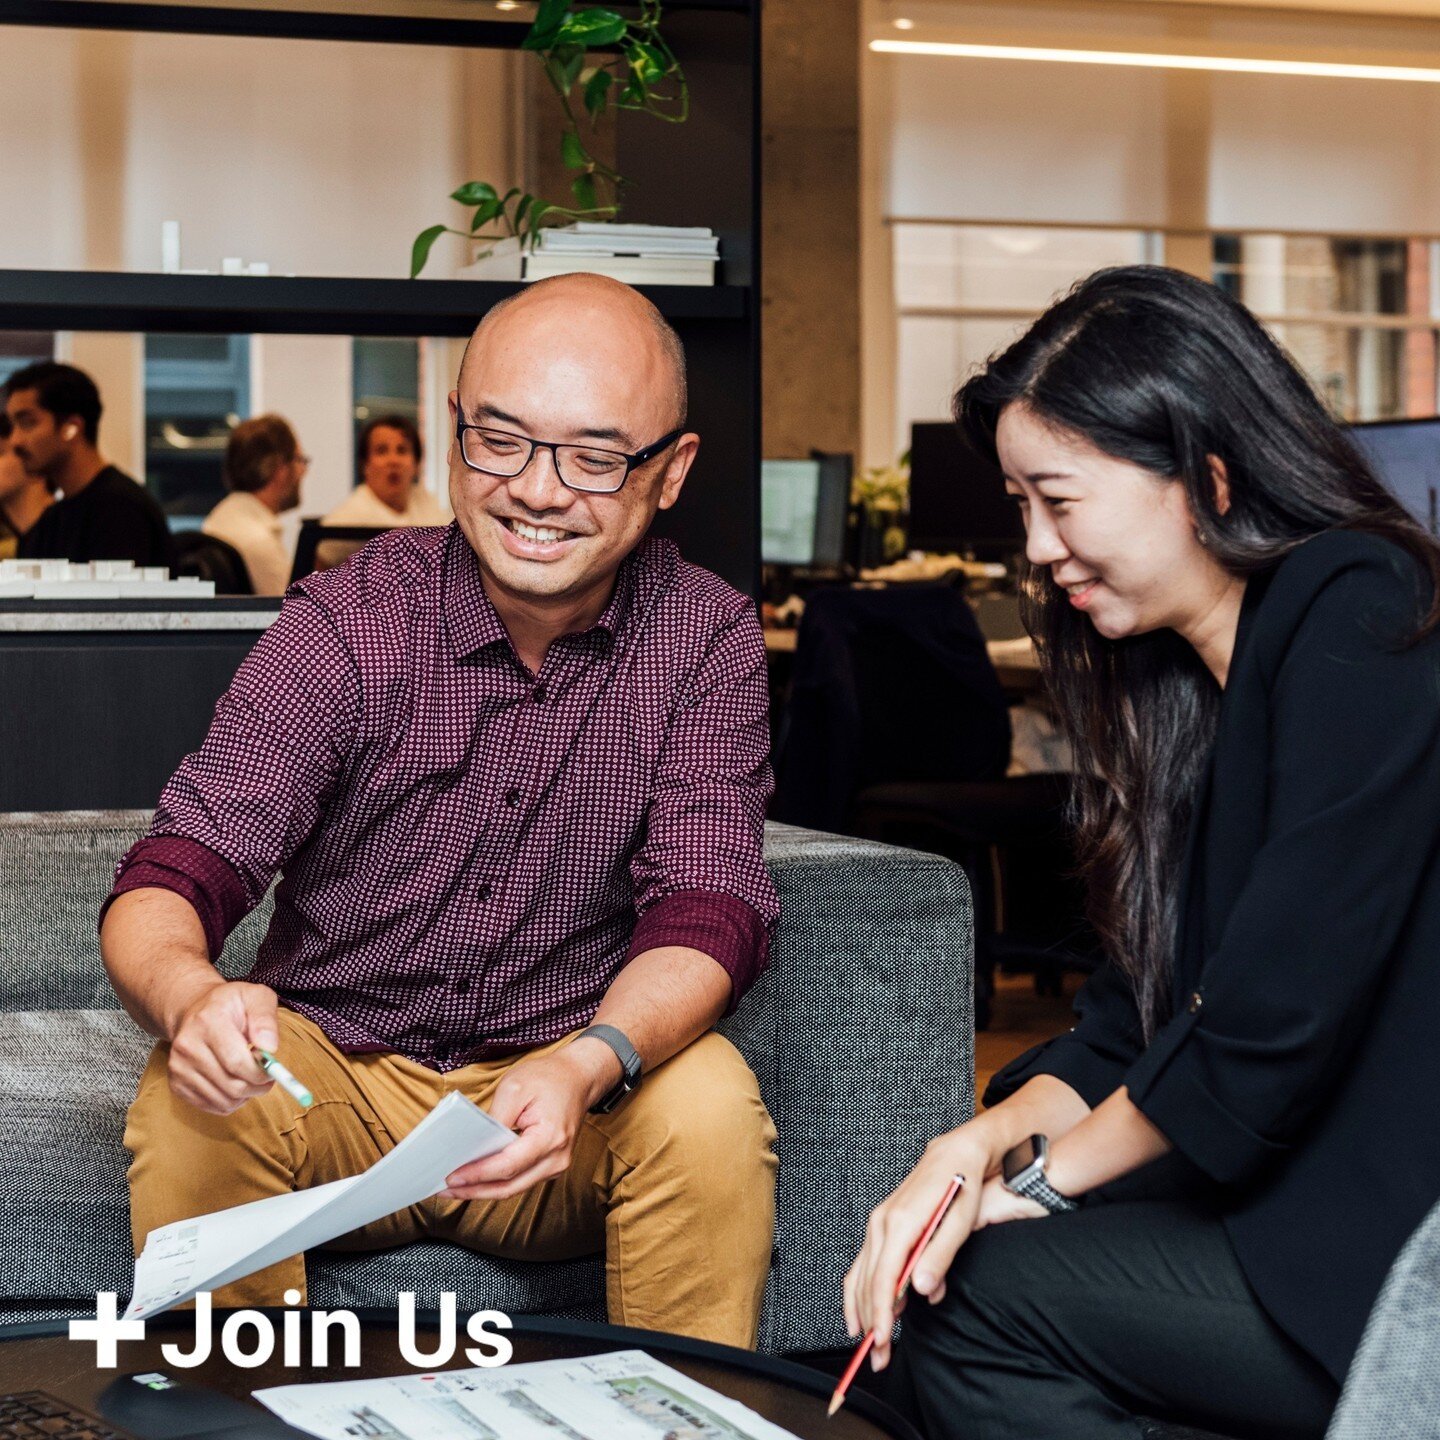 JOIN US &bull; Sydney, NSW⁠
⁠
An incredible opportunity has just opened up in our Sydney studio for not just one, but two Experienced Architectural Graduates to join our team!⁠
⁠
You'll have the chance to hone your skillset while working alongside a 